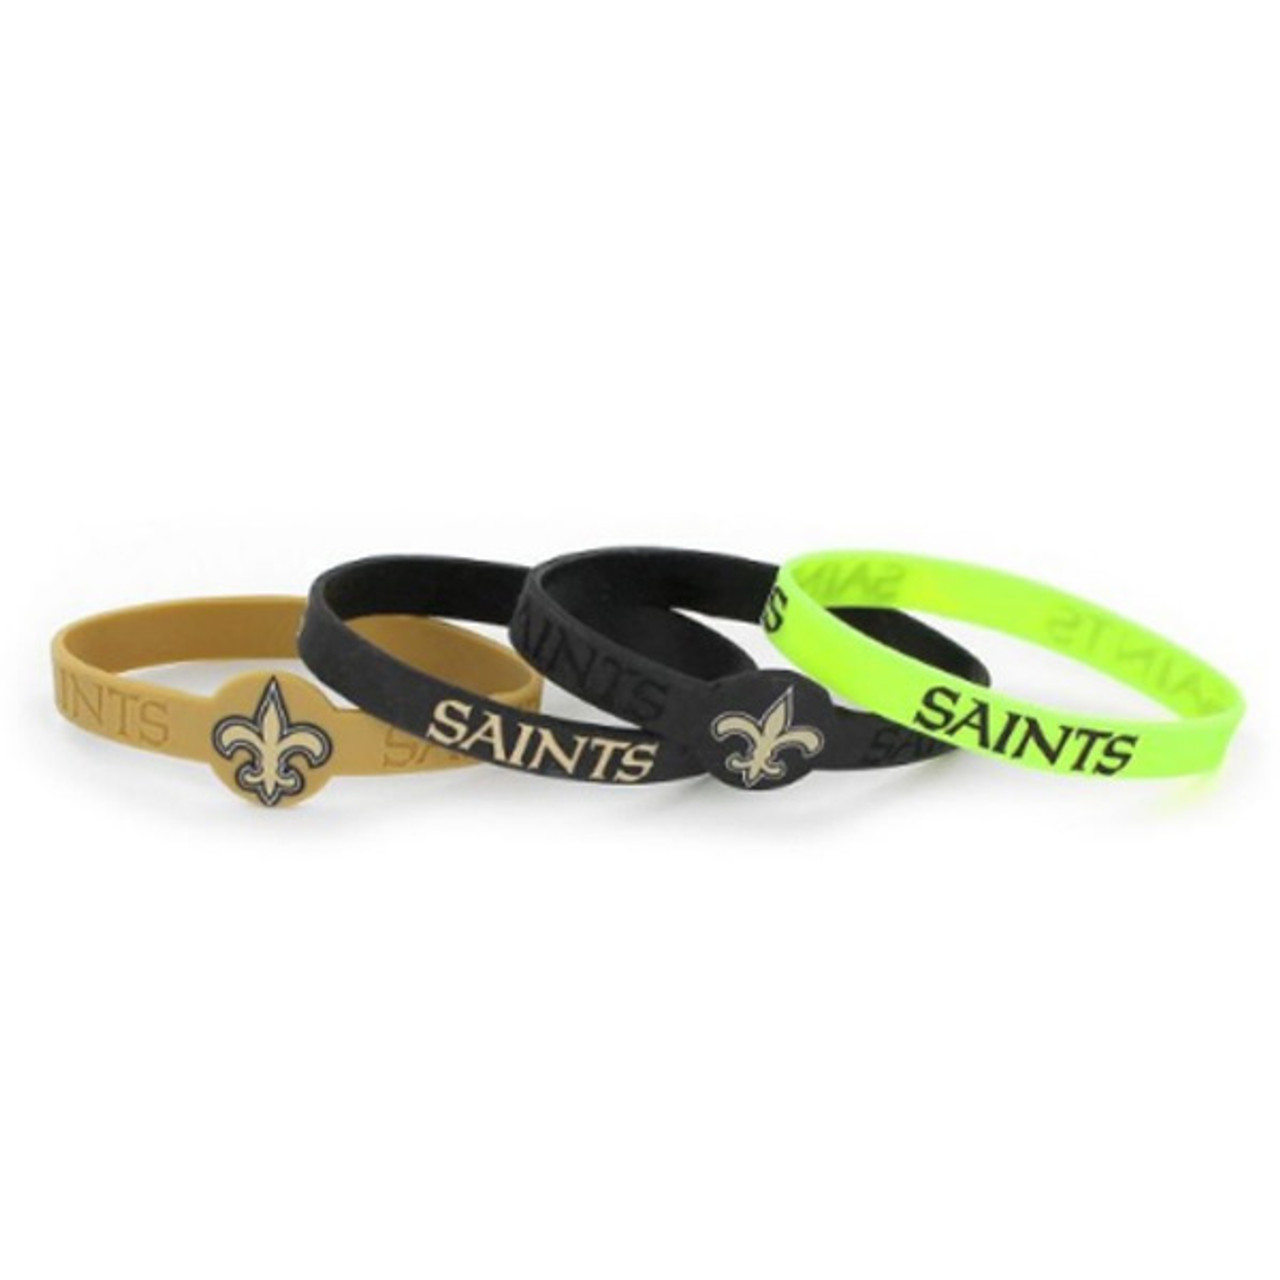 GOLDEN KNIGHTS SILICONE BRACELET 4-PACK